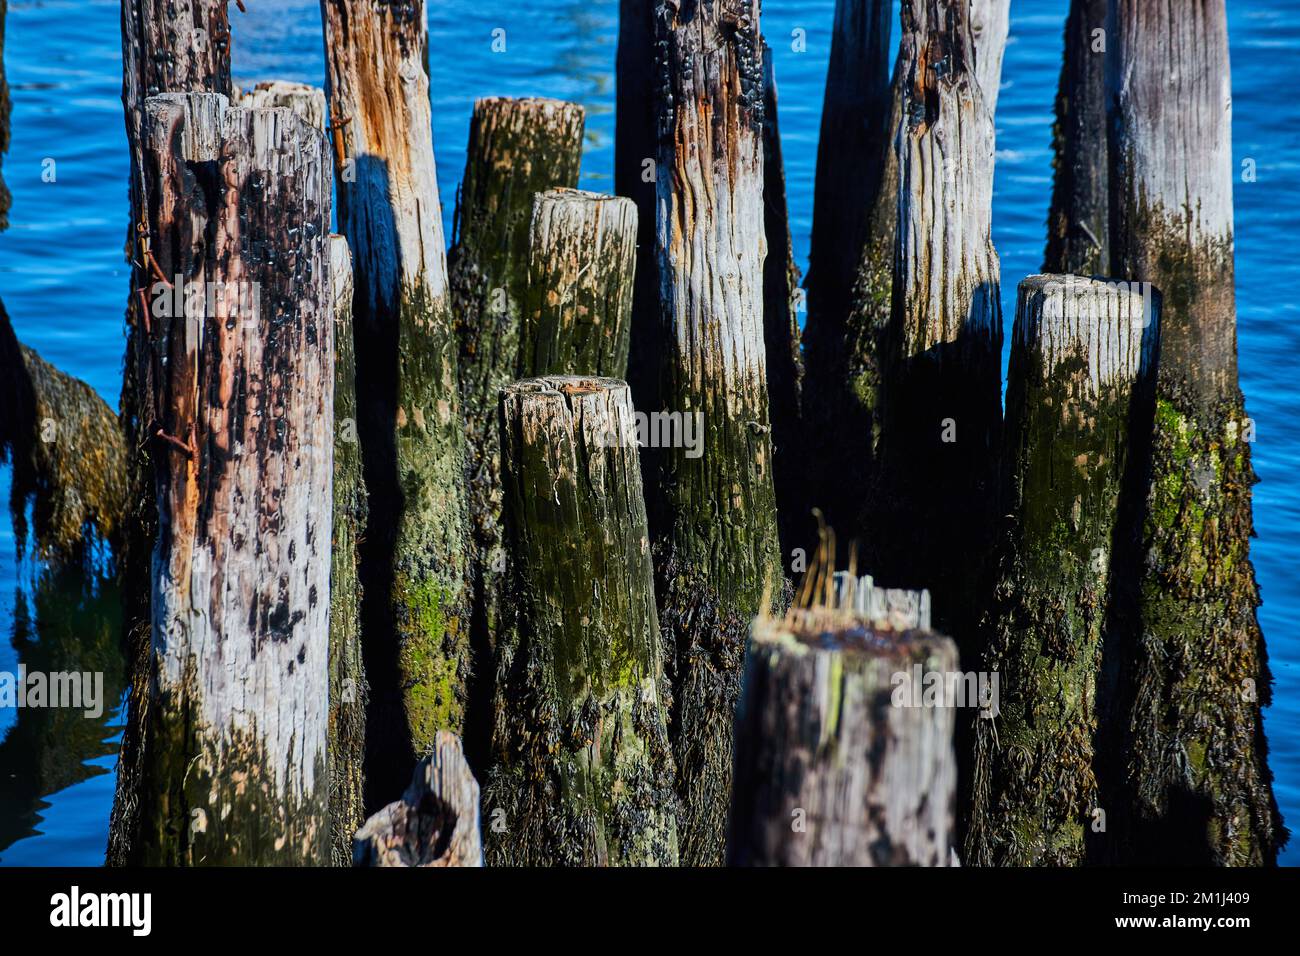 Detailed cluster of mossy wood pilings in dock Stock Photo